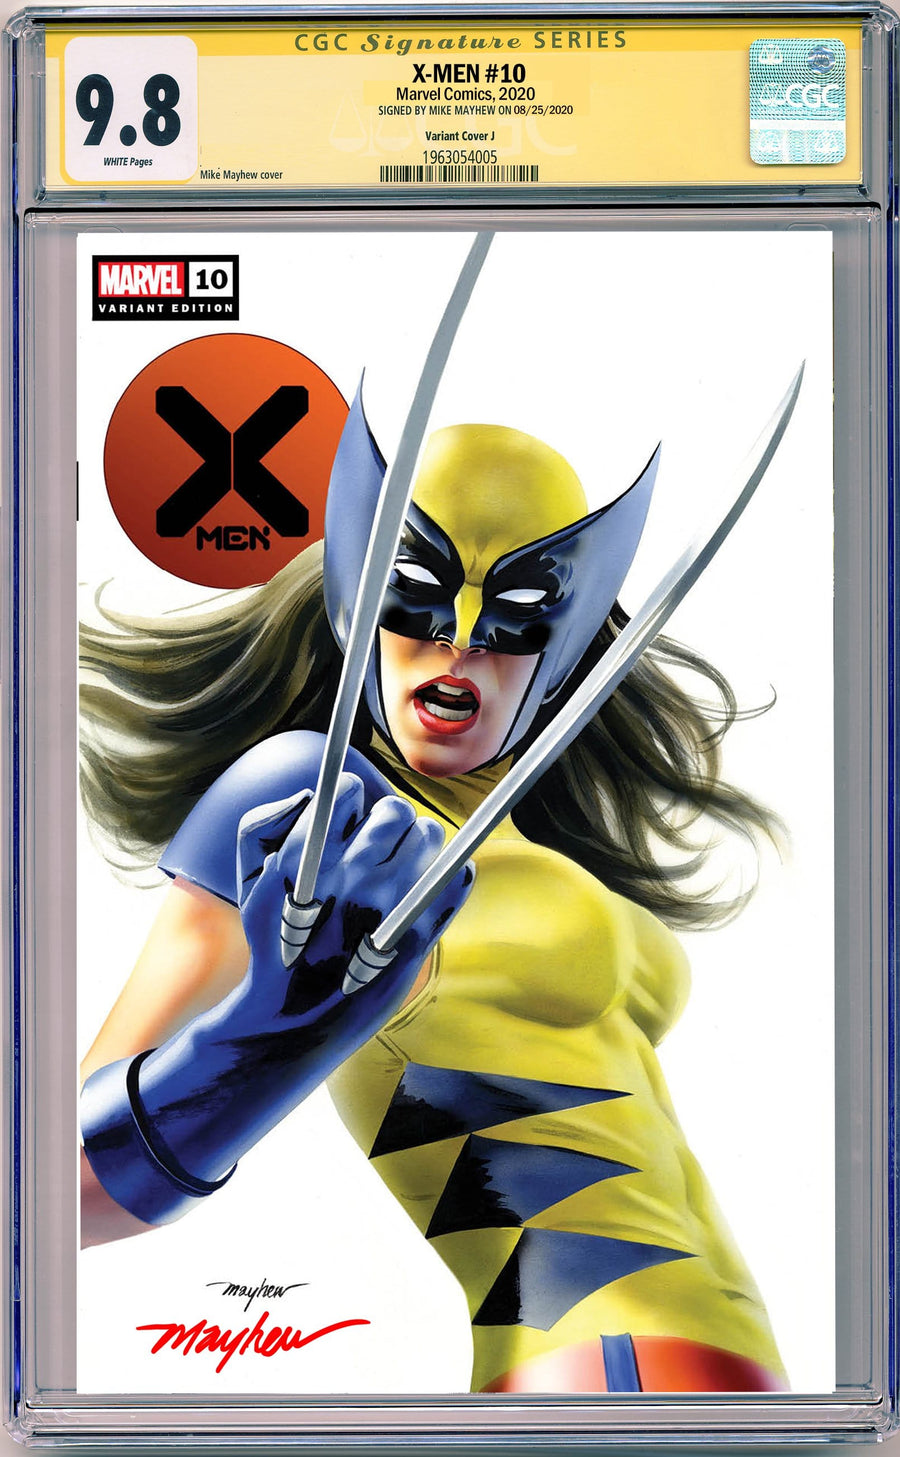 X-MEN #10 X-23 MIKE MAYHEW STUDIO EXCLUSIVE VARIANTS CGC SIG SERIES 9.6 AND ABOVE OPTIONS